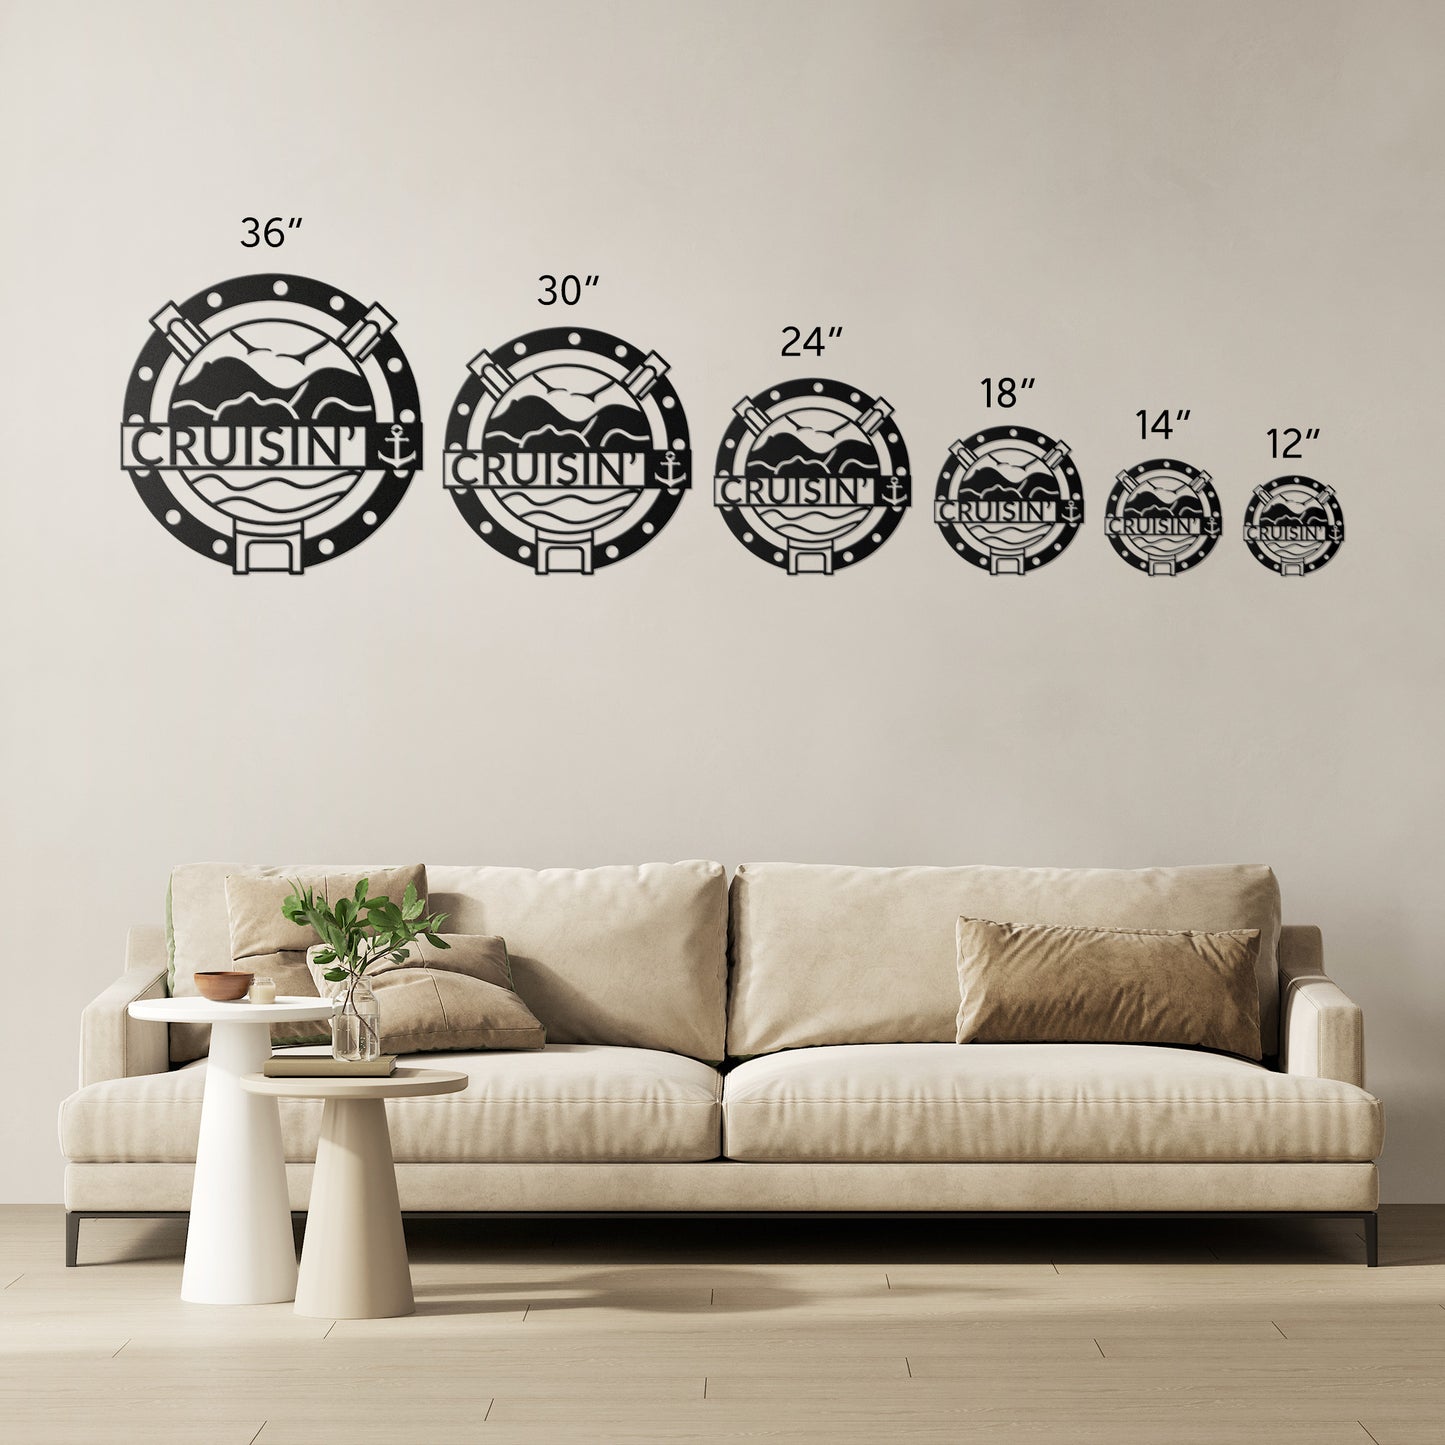 Cruise Metal Wall Decor, Cruise Ship Porthole Wall Art For Your Favorite Cruise Lover